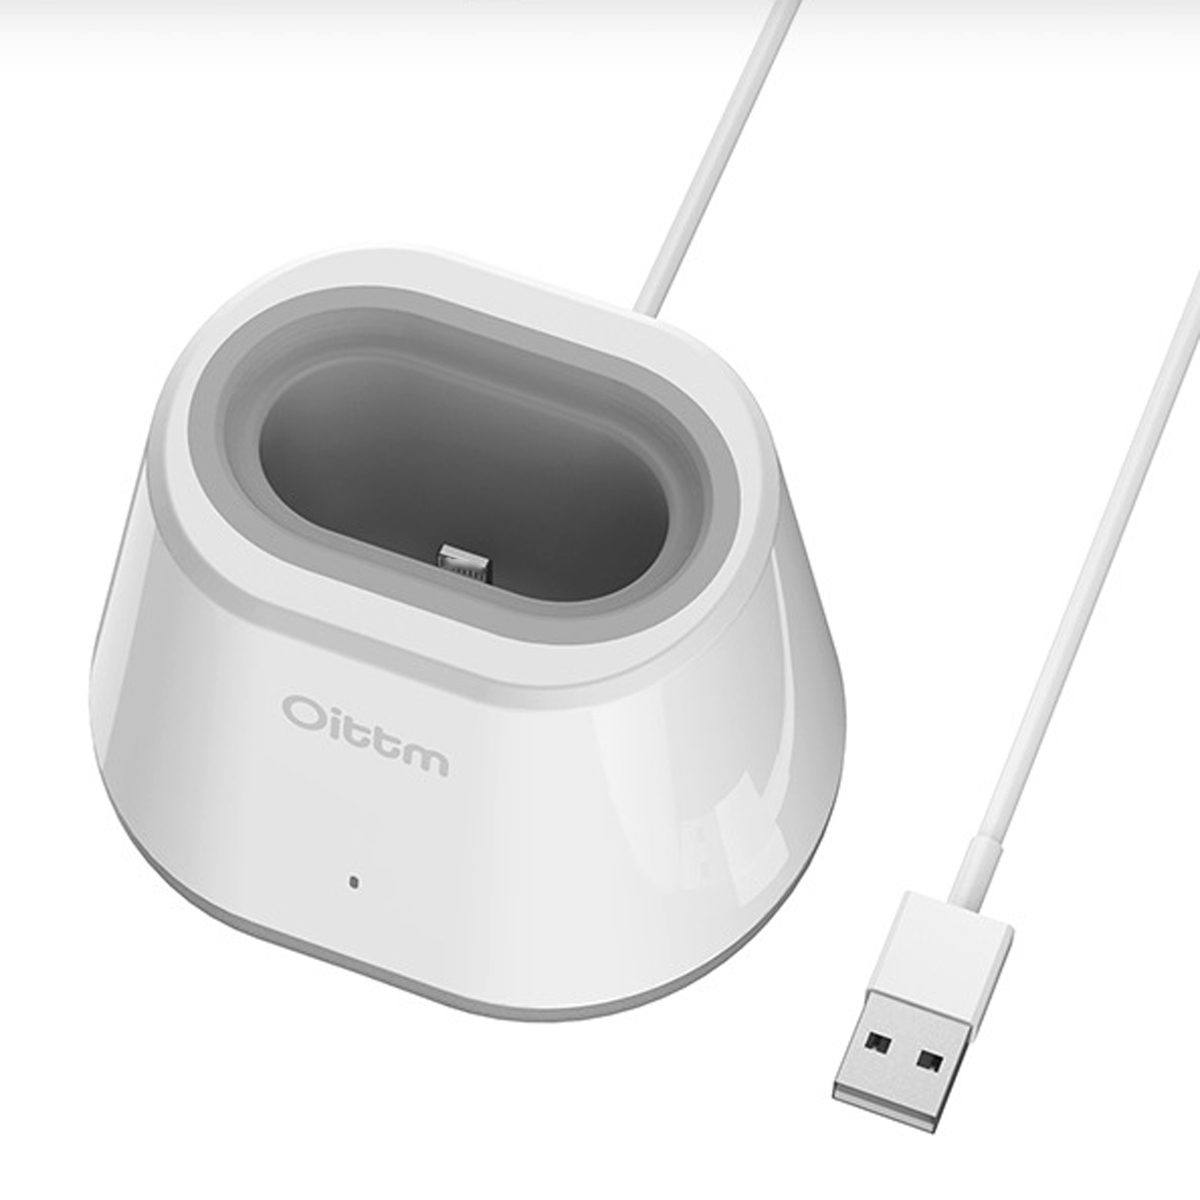 Oittm Charging Dock Station Standing Cable For AirPods